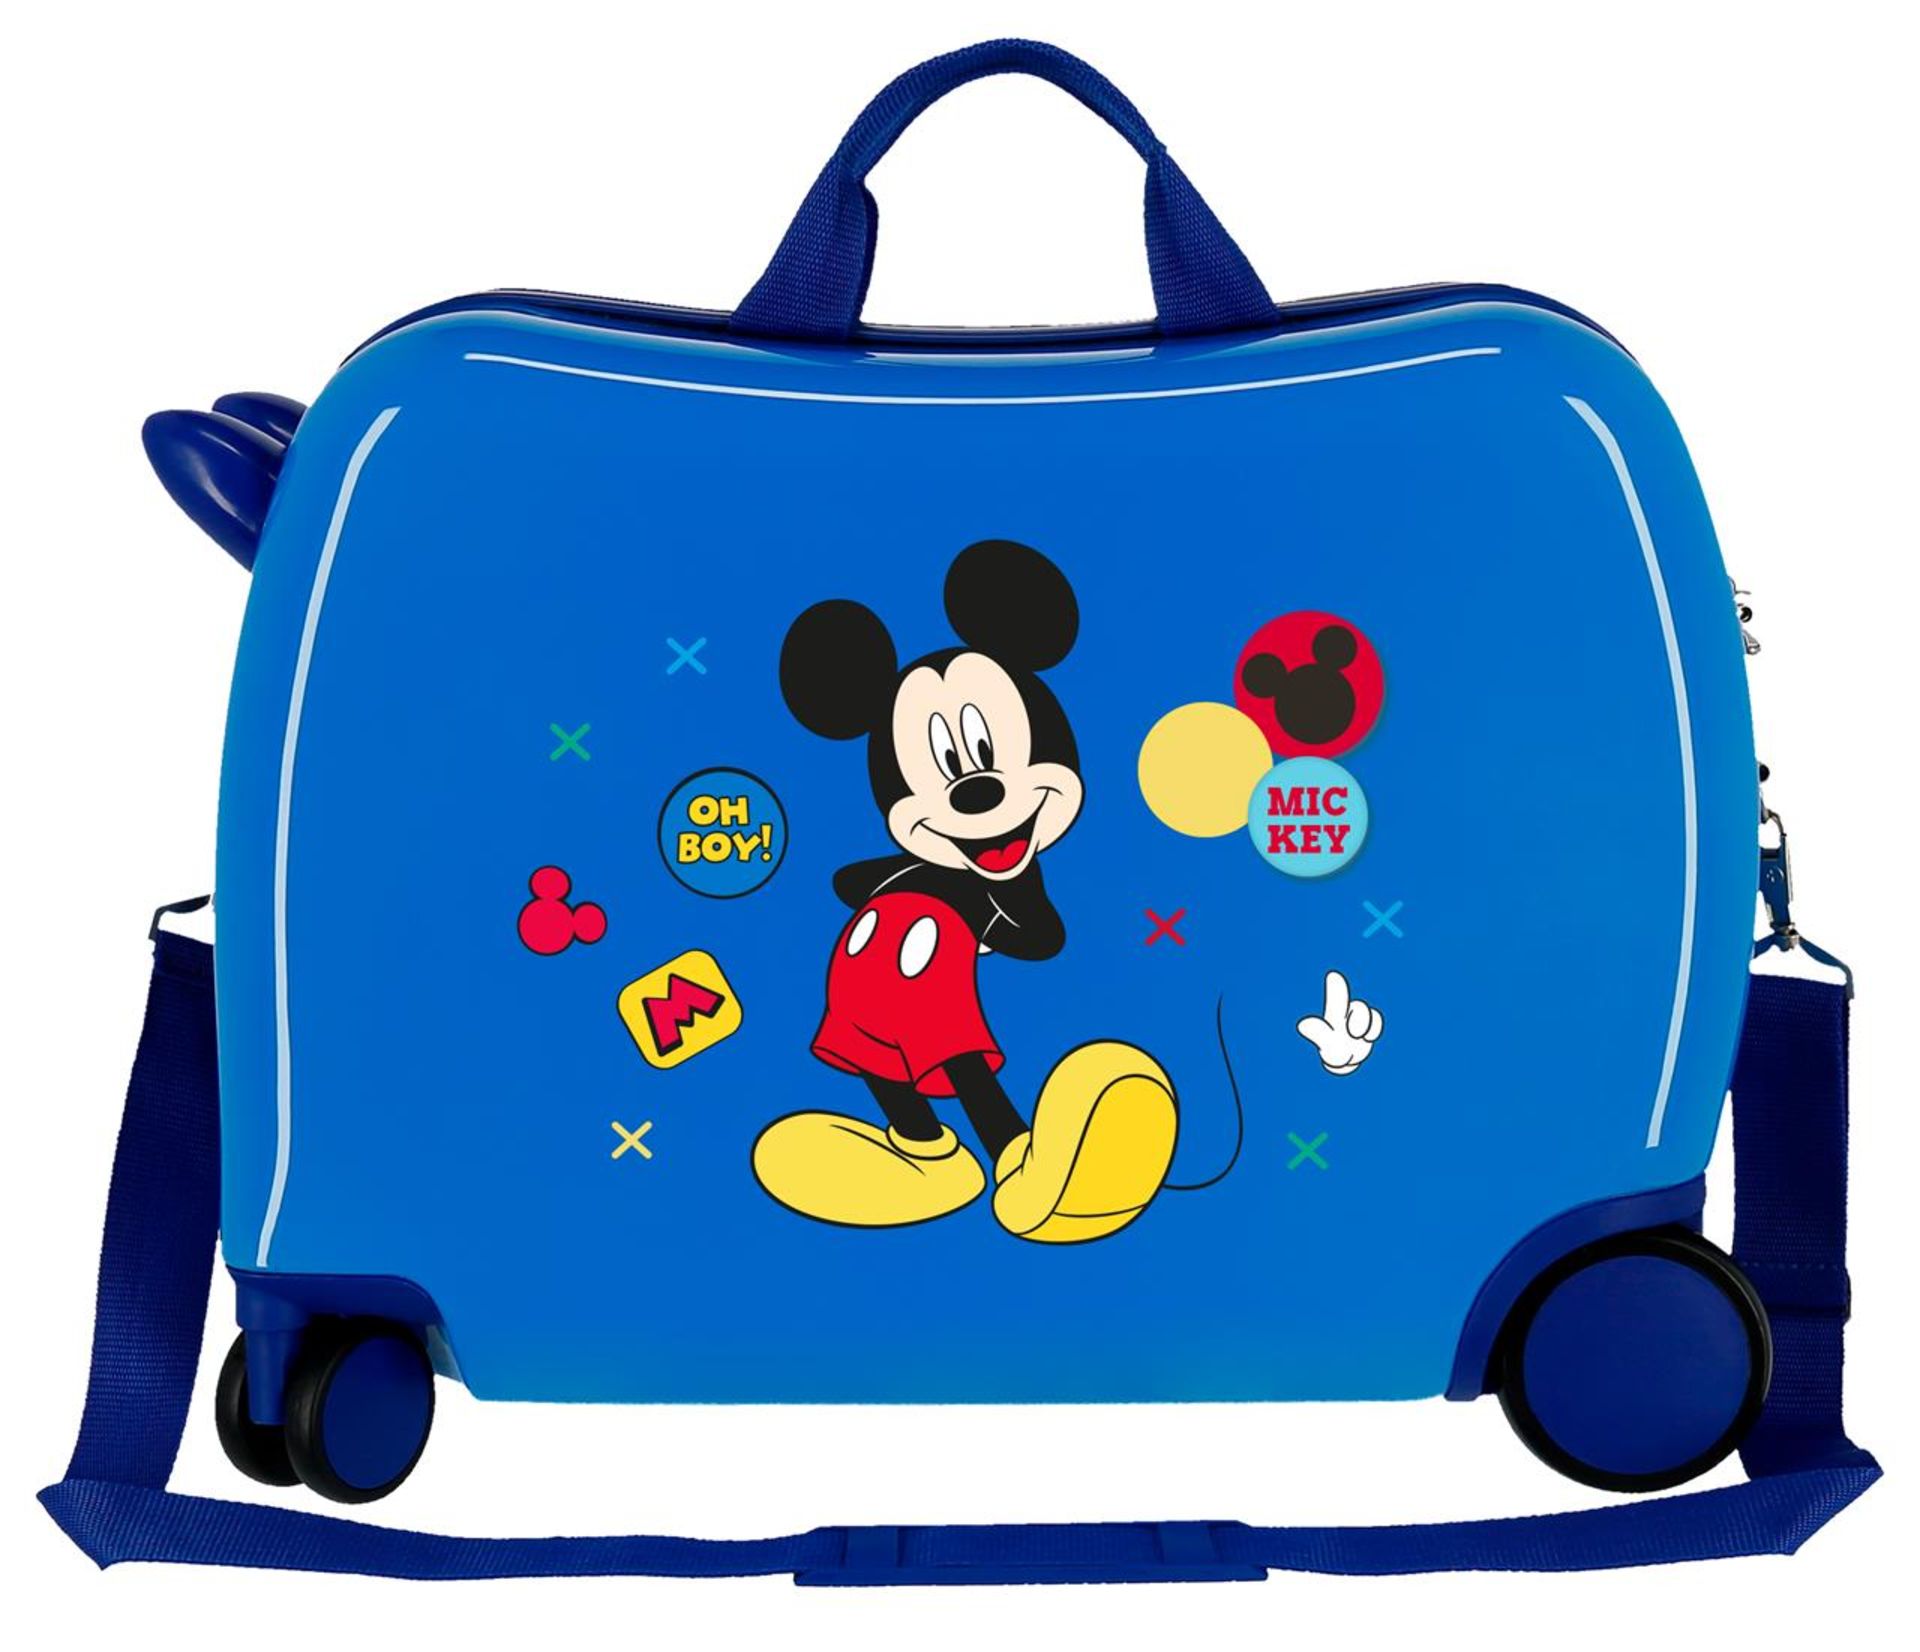 Pallet Of 42 Joumma Bags Rolling Suitcases In Various Disney Designs And Colours 50X38X20 Cm - Image 94 of 102